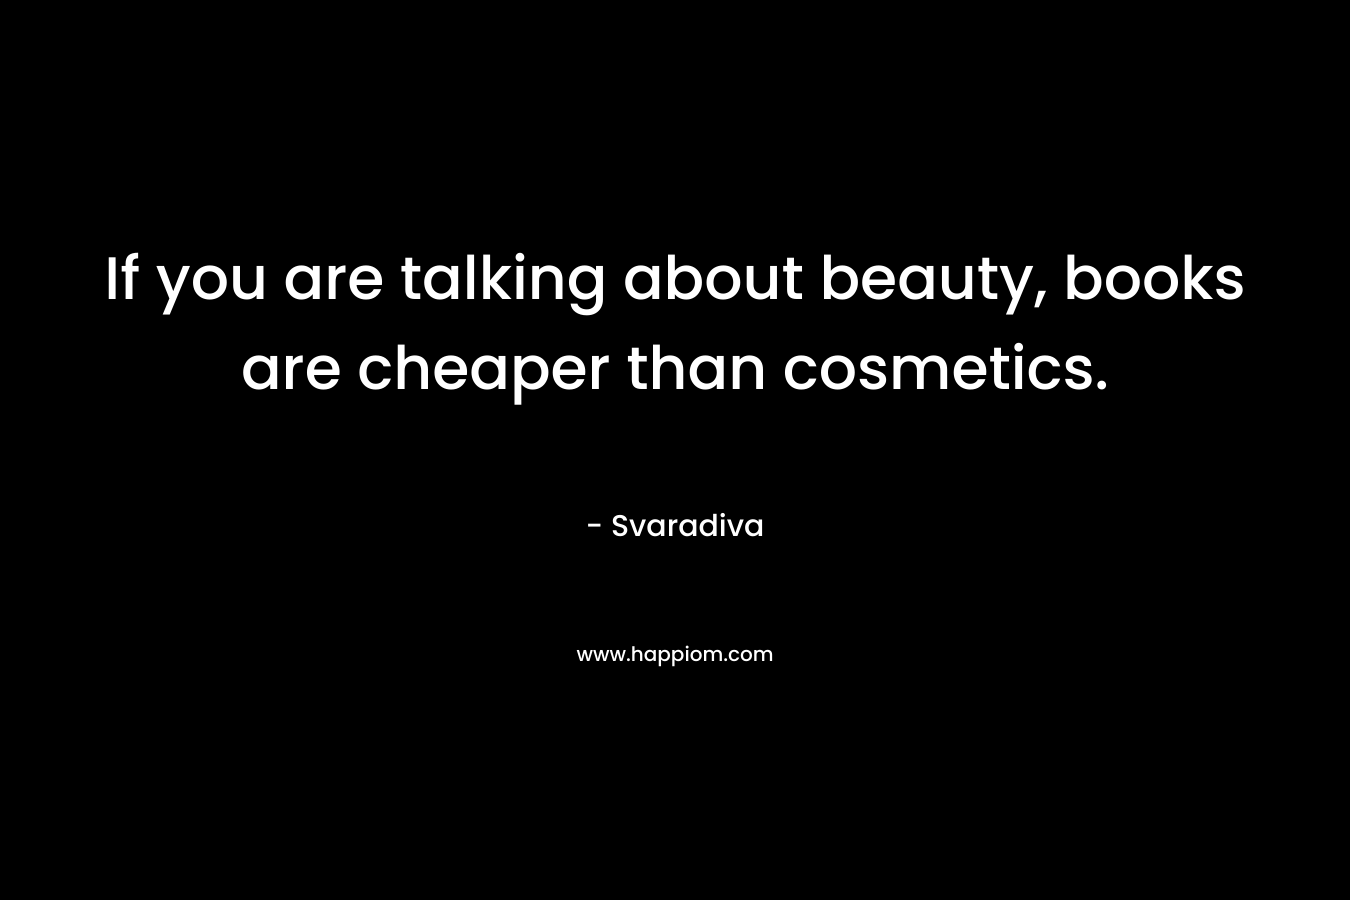 If you are talking about beauty, books are cheaper than cosmetics.